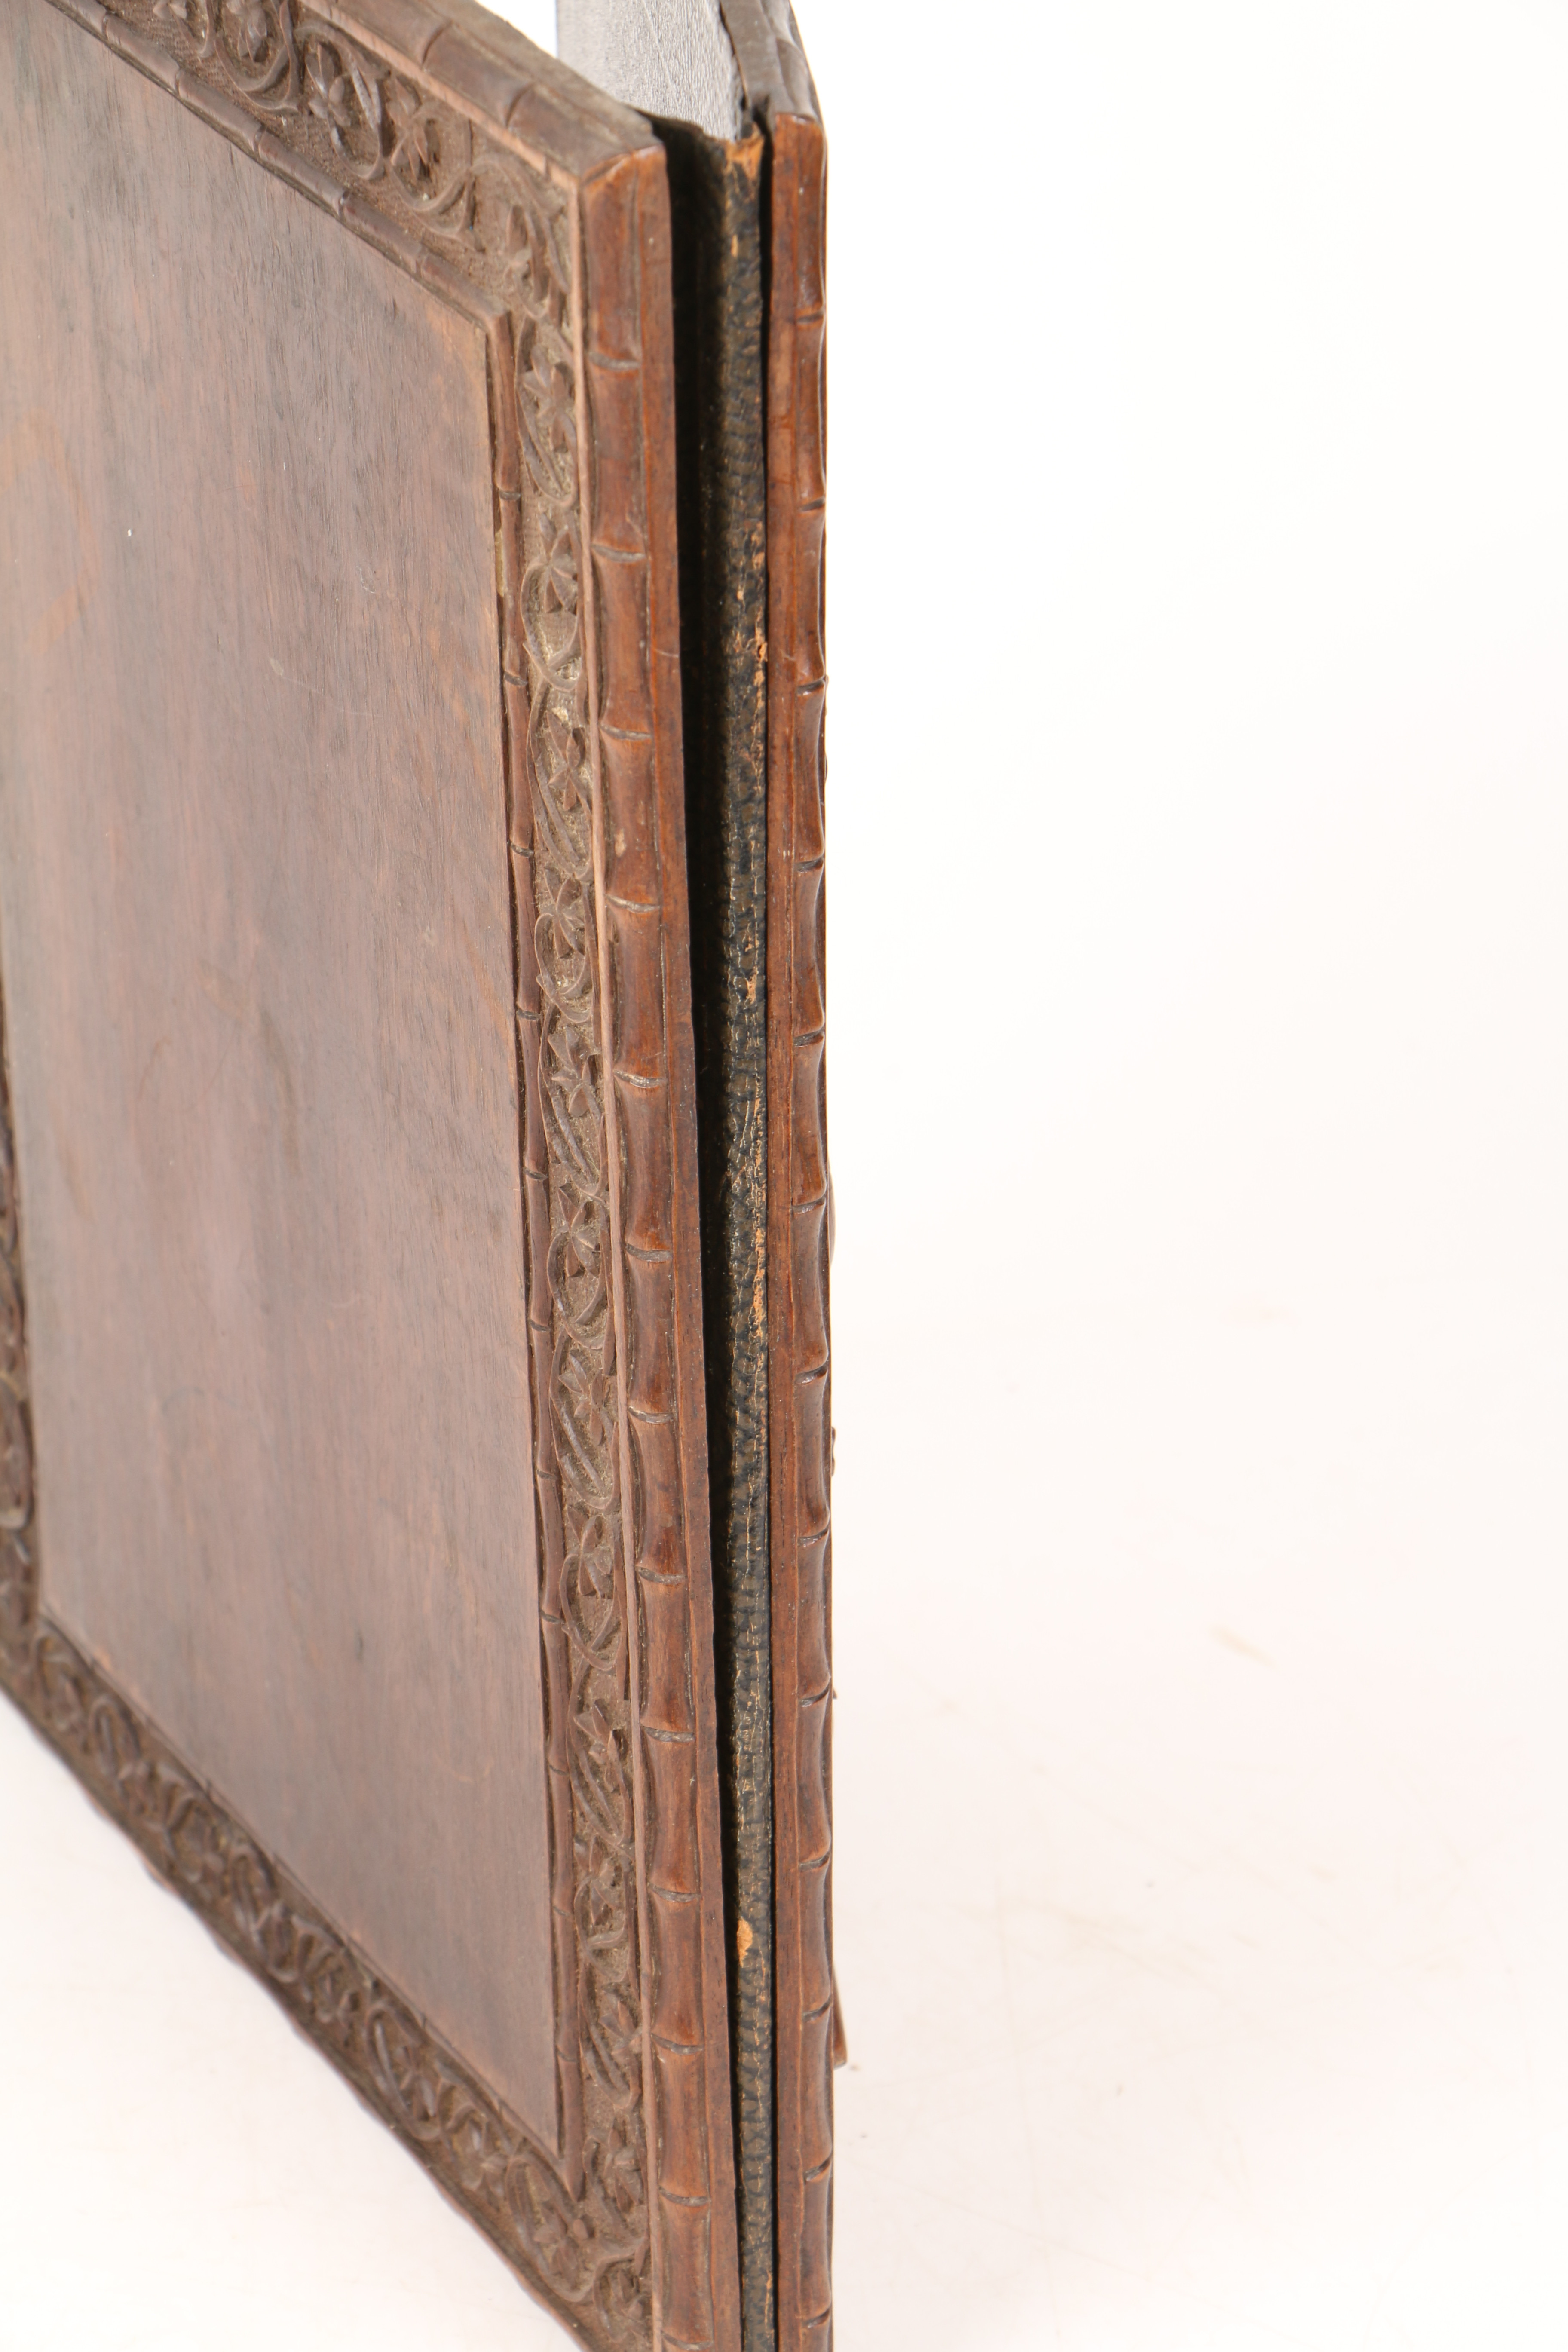 A 19TH CENTURY ANGLO INDIAN HARDWOOD BOOK COVER. - Image 4 of 4